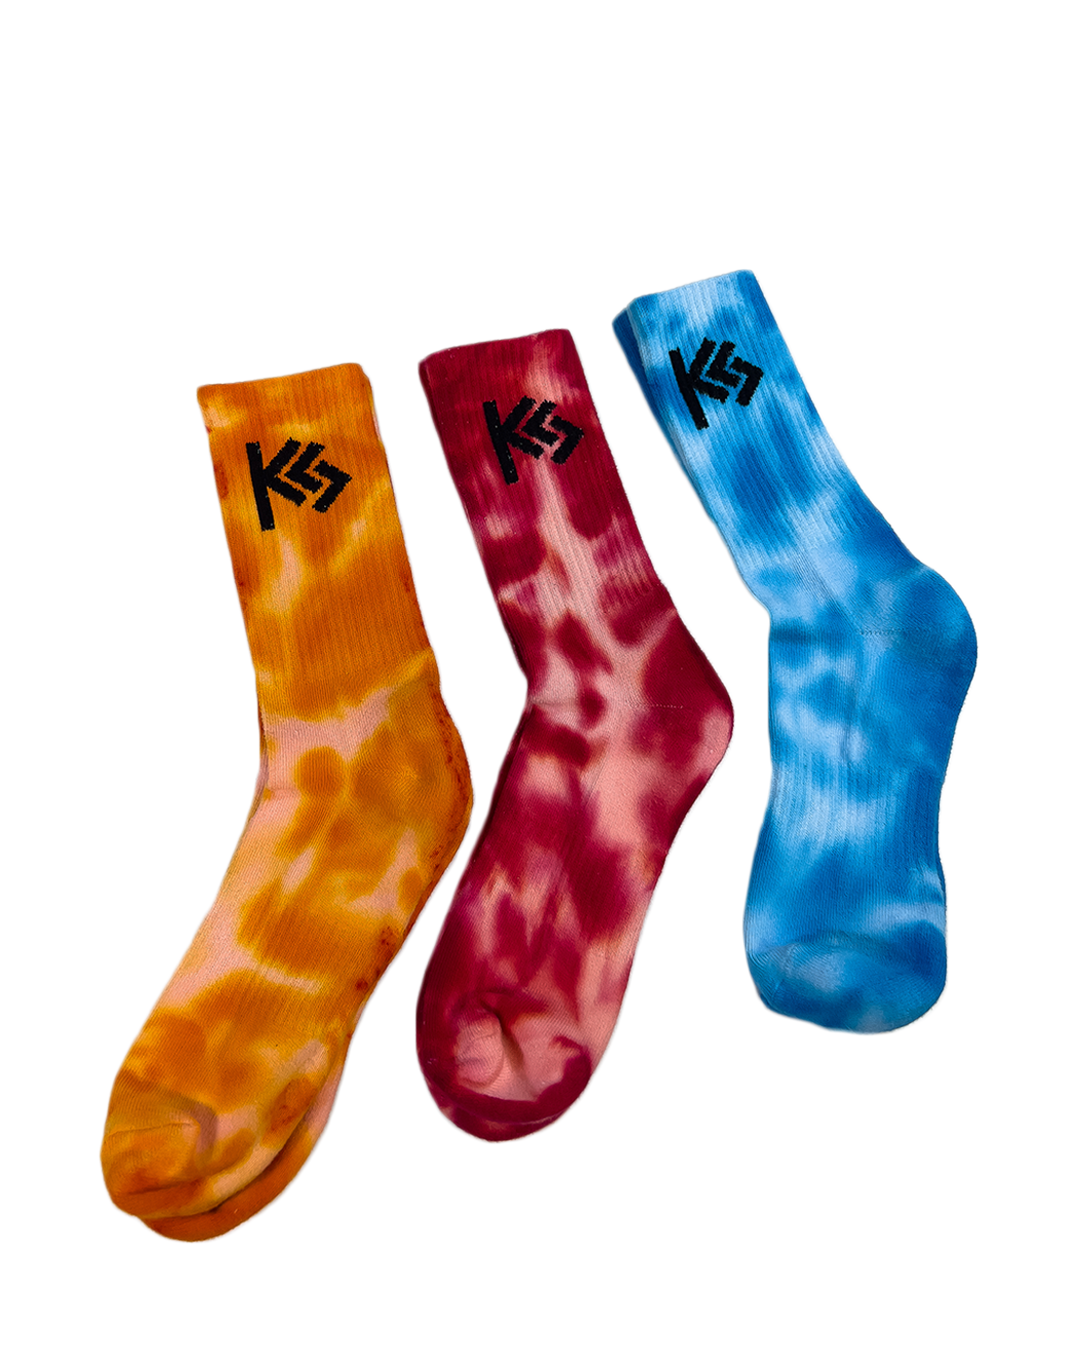 "Fire and Sky" Hand-Dyed Crew Socks